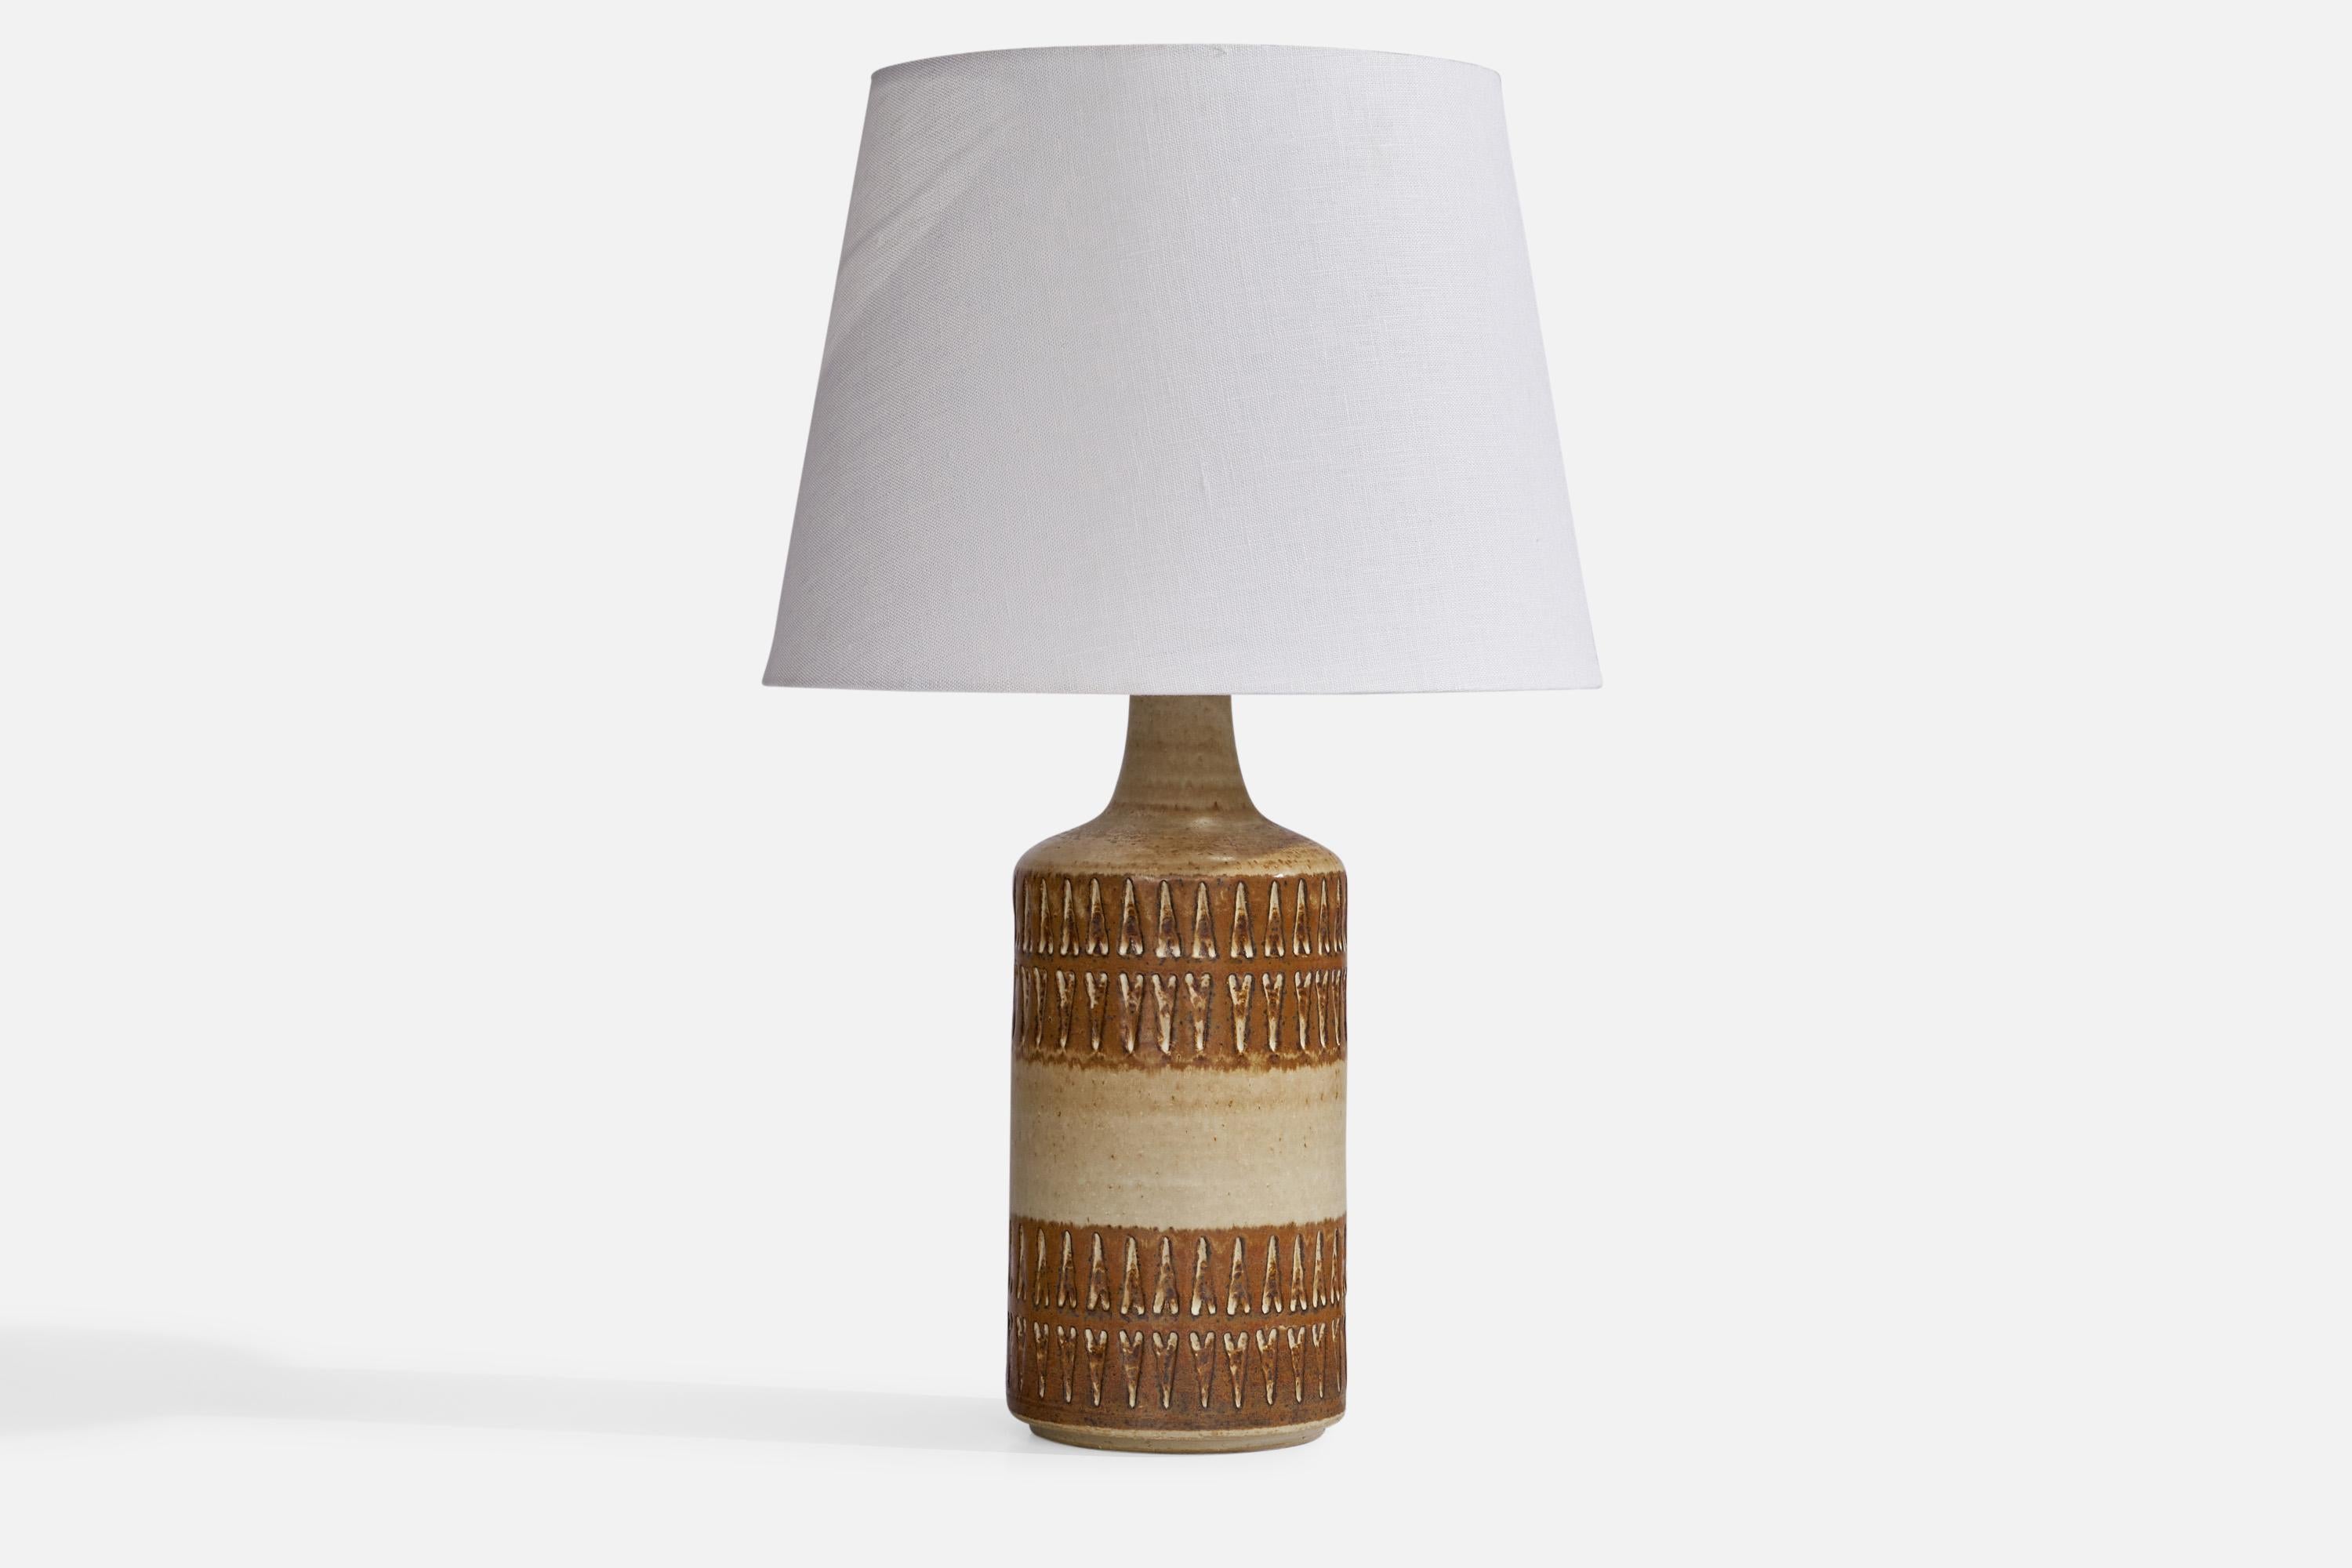 A brown and beige-glazed stoneware table lamp designed and produced by Søholm, Denmark, 1960s.
 
Dimensions of Lamp (inches): 14.2” H x 4.9